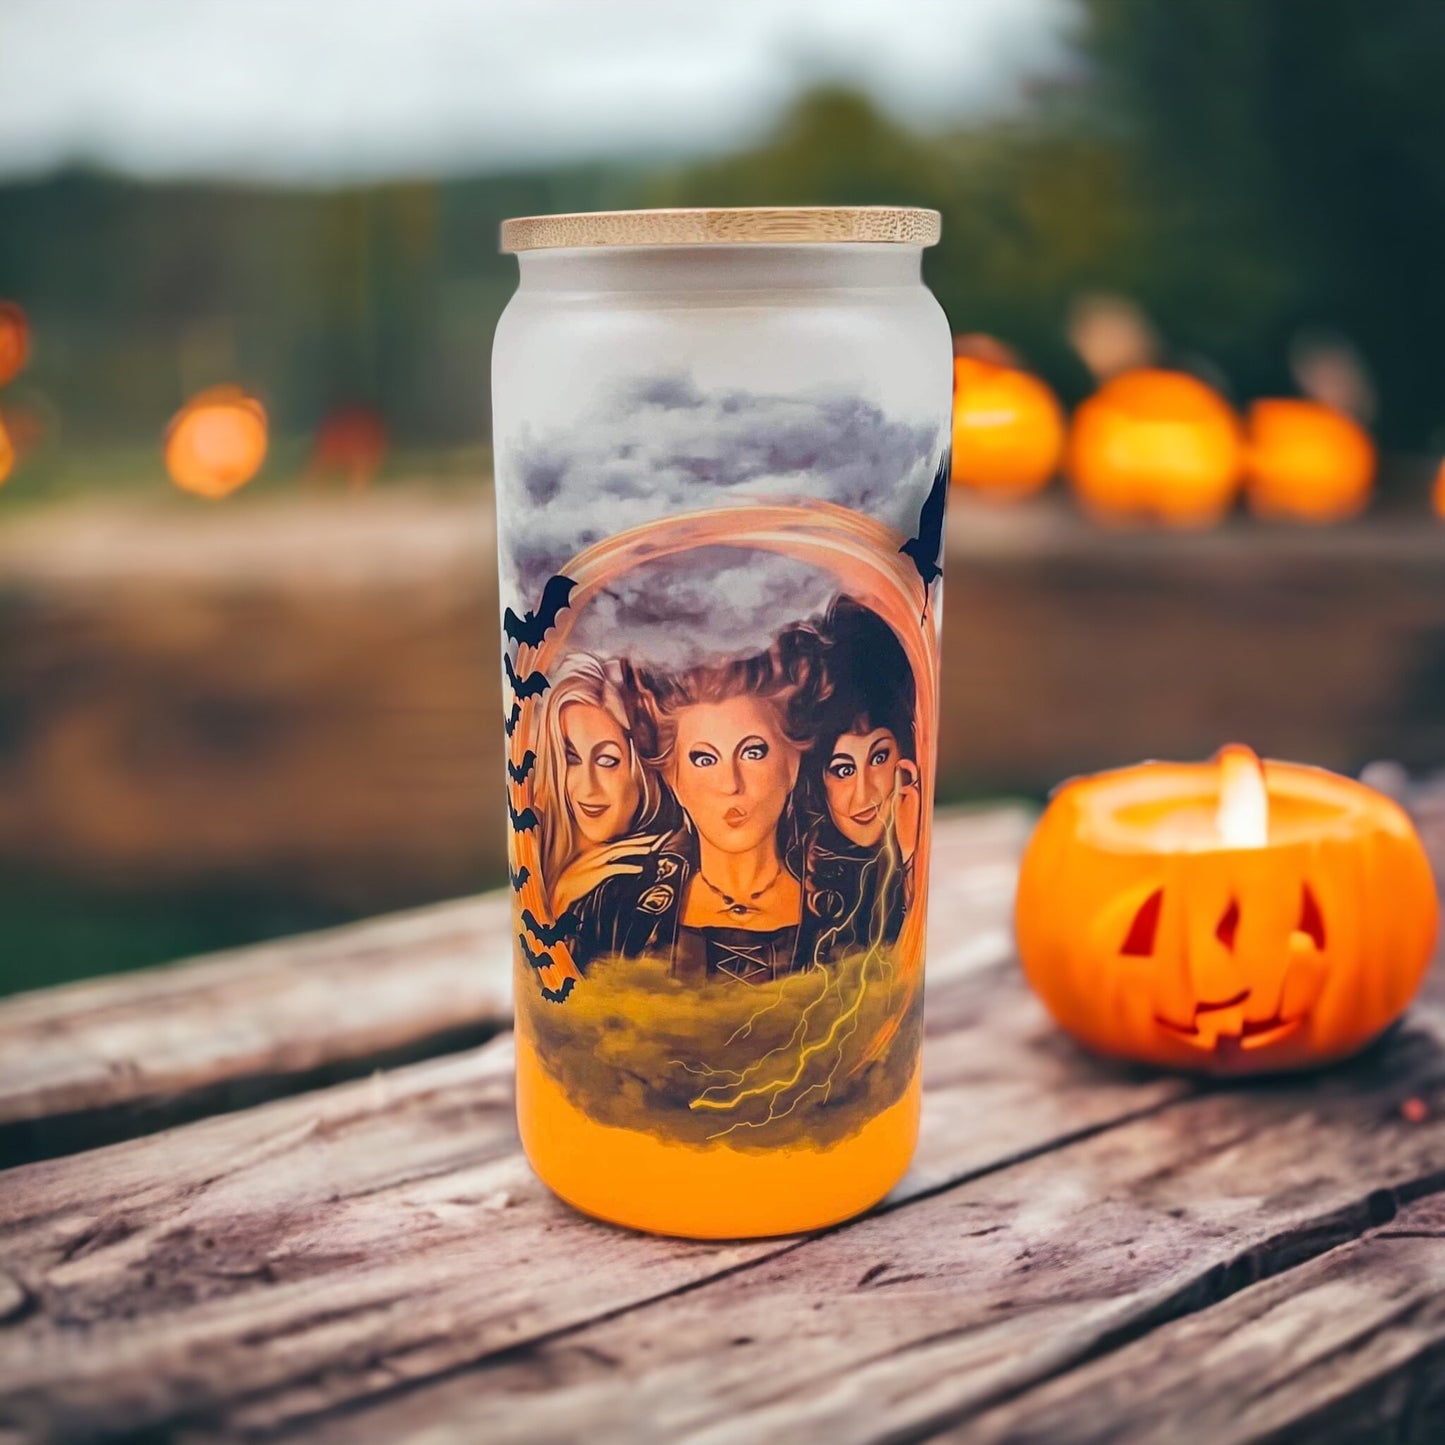 Hocus pocus frosted glass cup